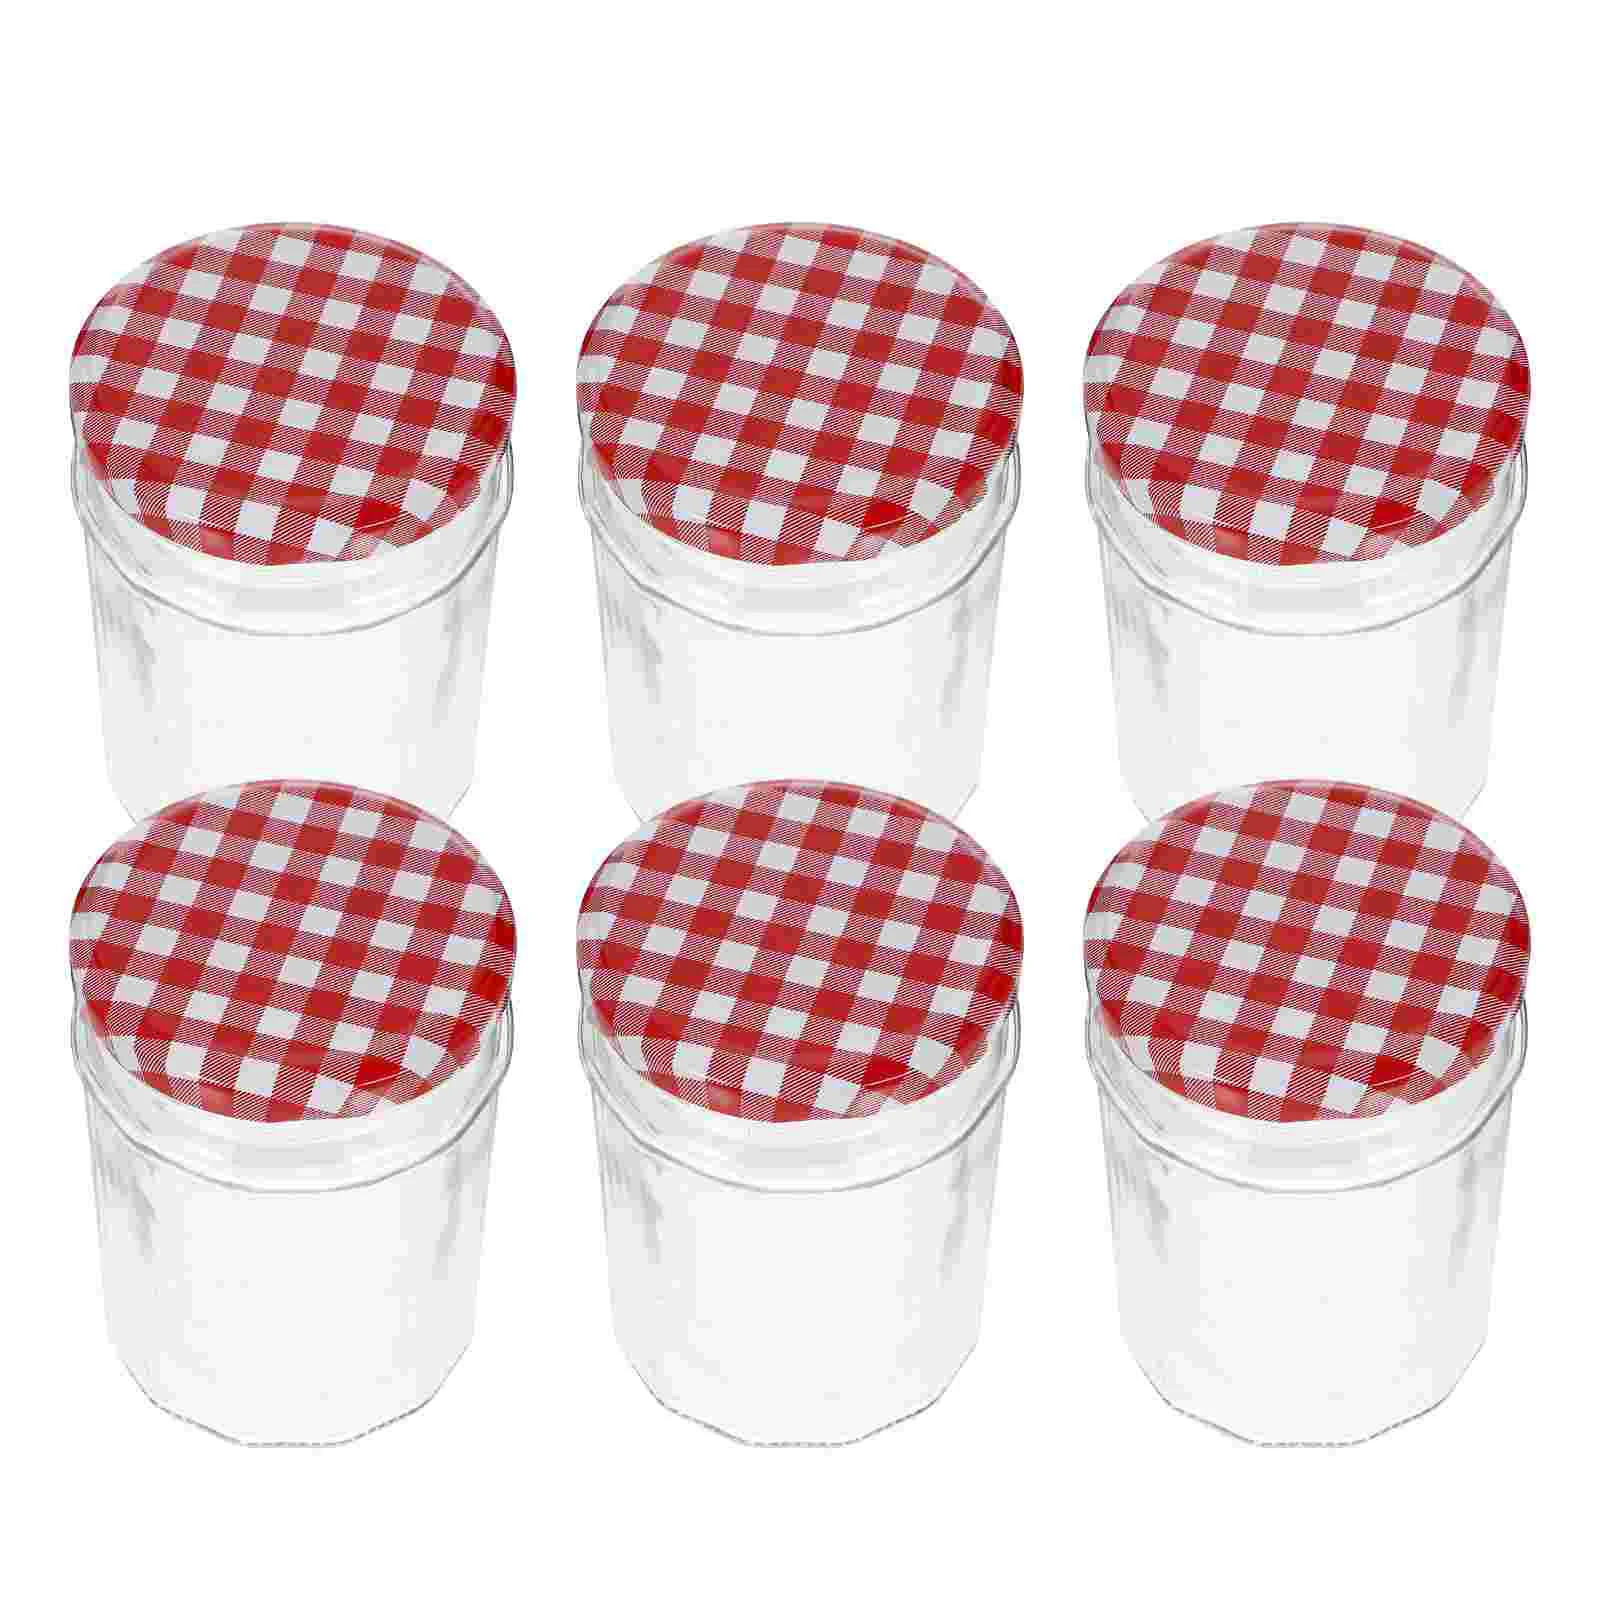 

Jars Jar Mason Storage Candy Container Honey Canisters Airtight Clear Cans Mouth Wide Bottle Kitchen Flour Jam Sealed Snack